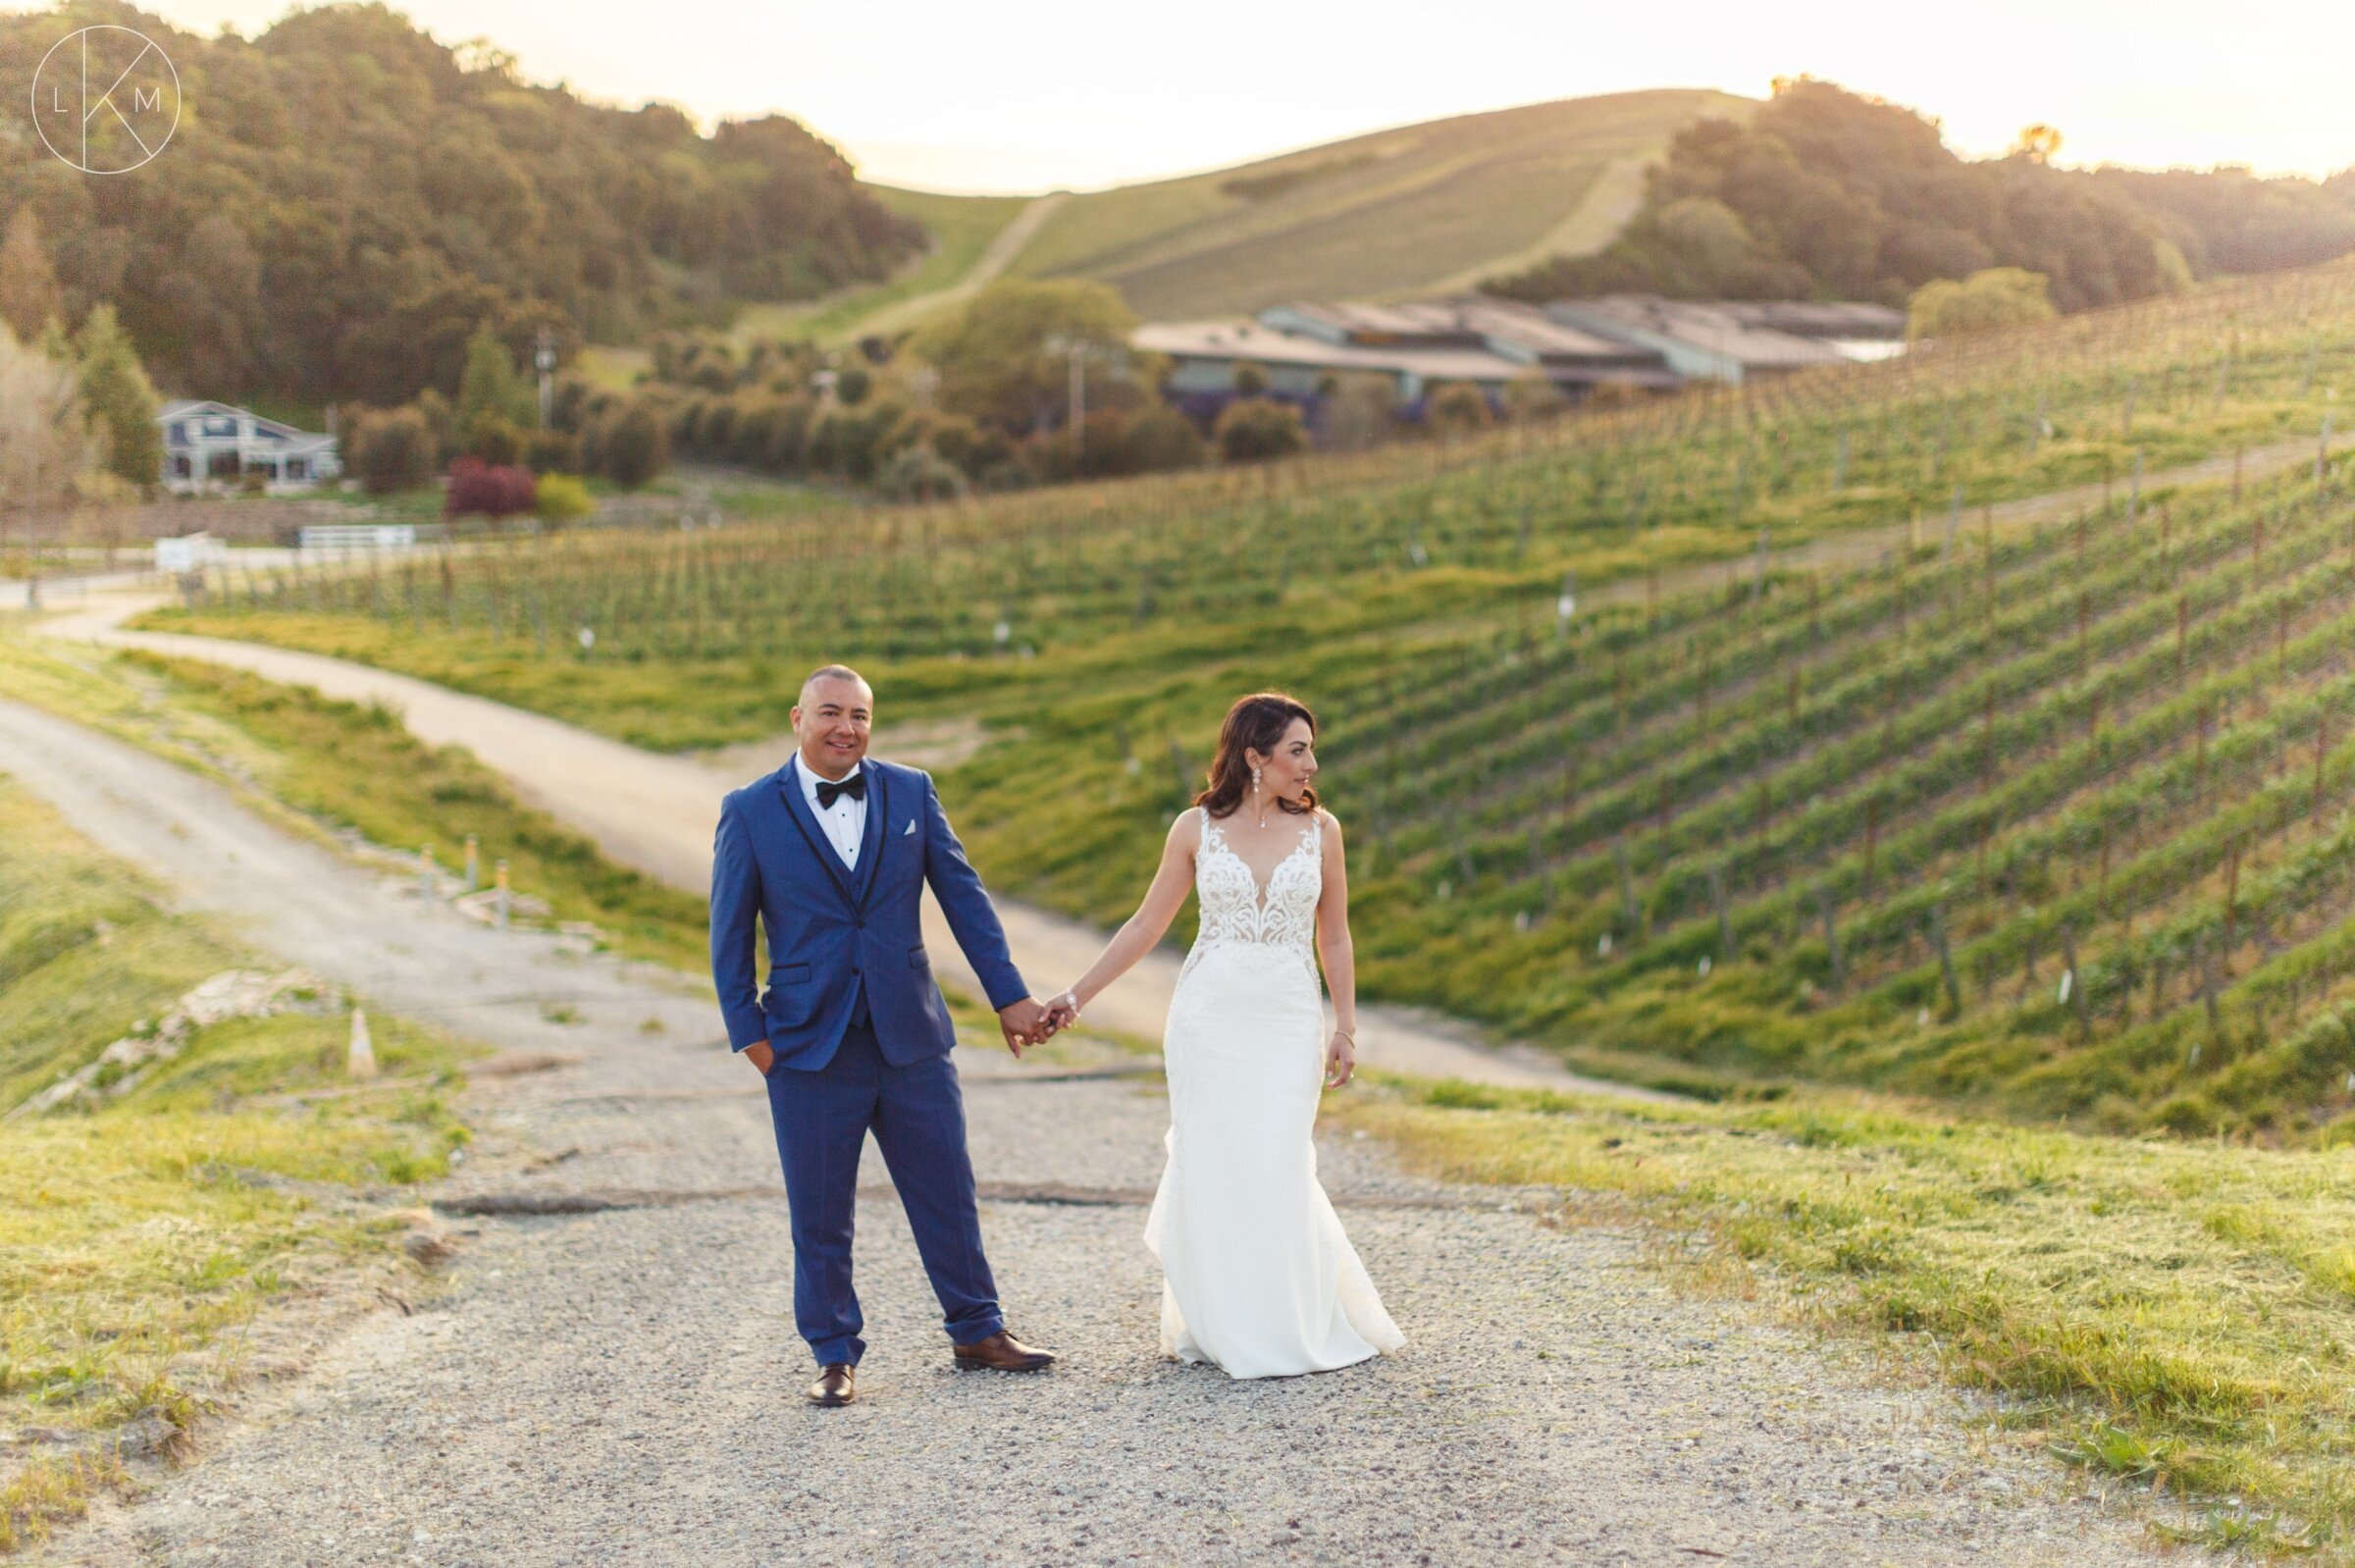 helvin-angela-paso-robles-destination-wedding-tooth-nail-winery 35.jpg